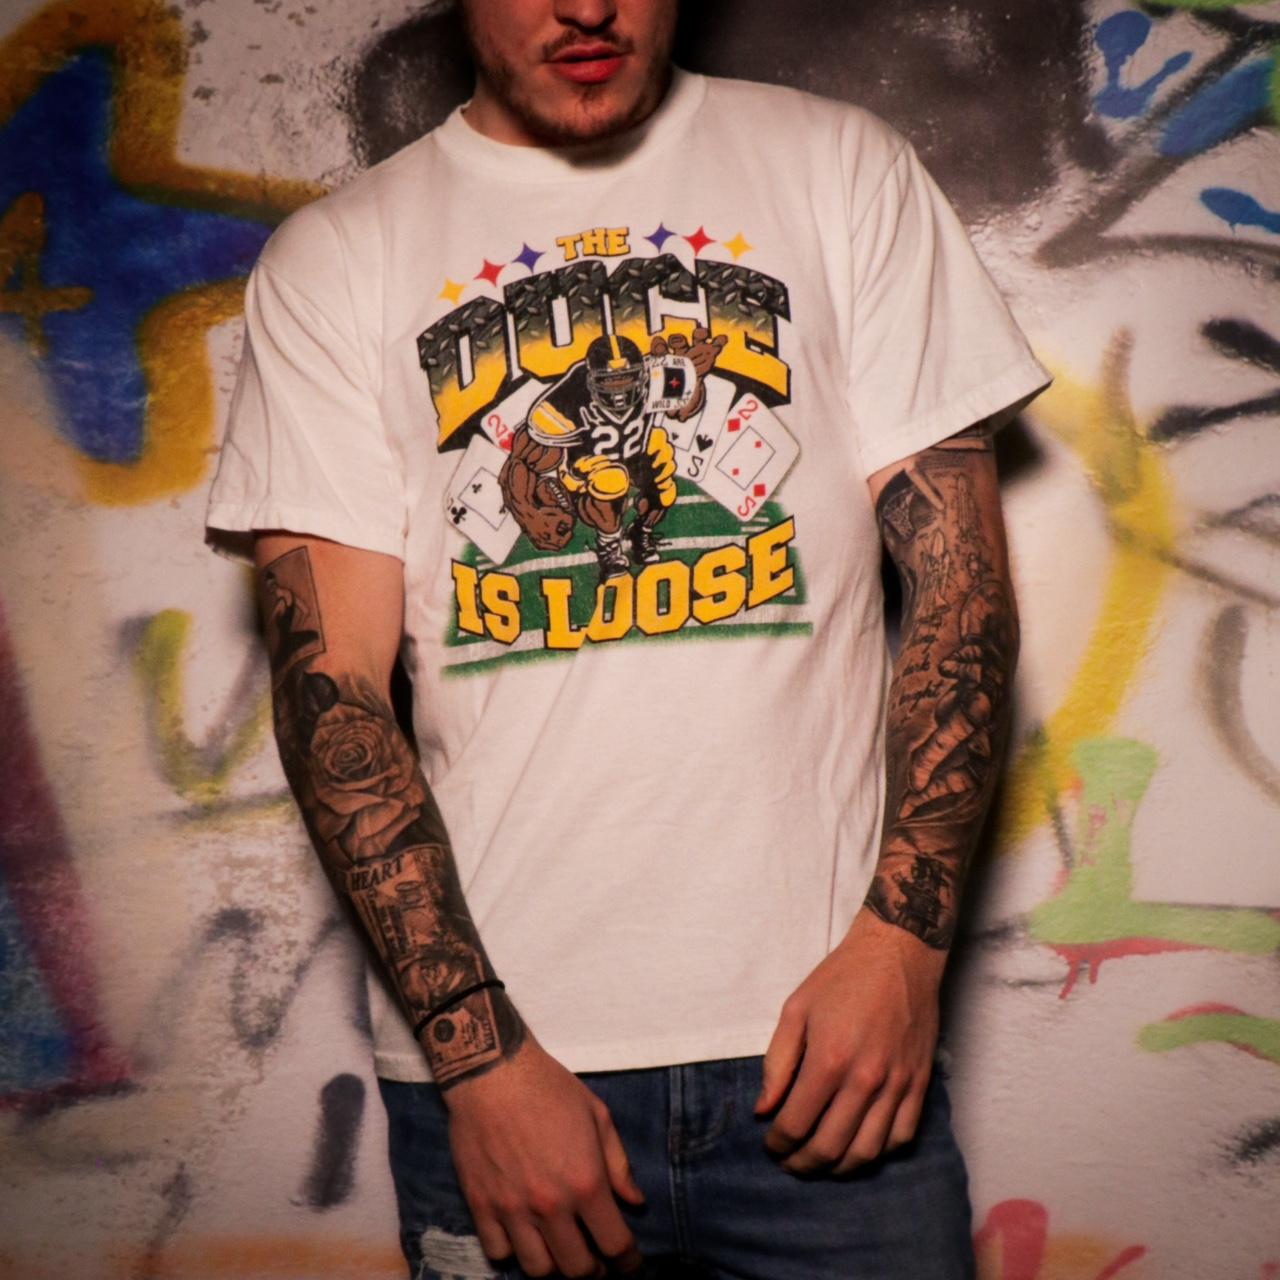 American Vintage Men's White and Yellow T-shirt